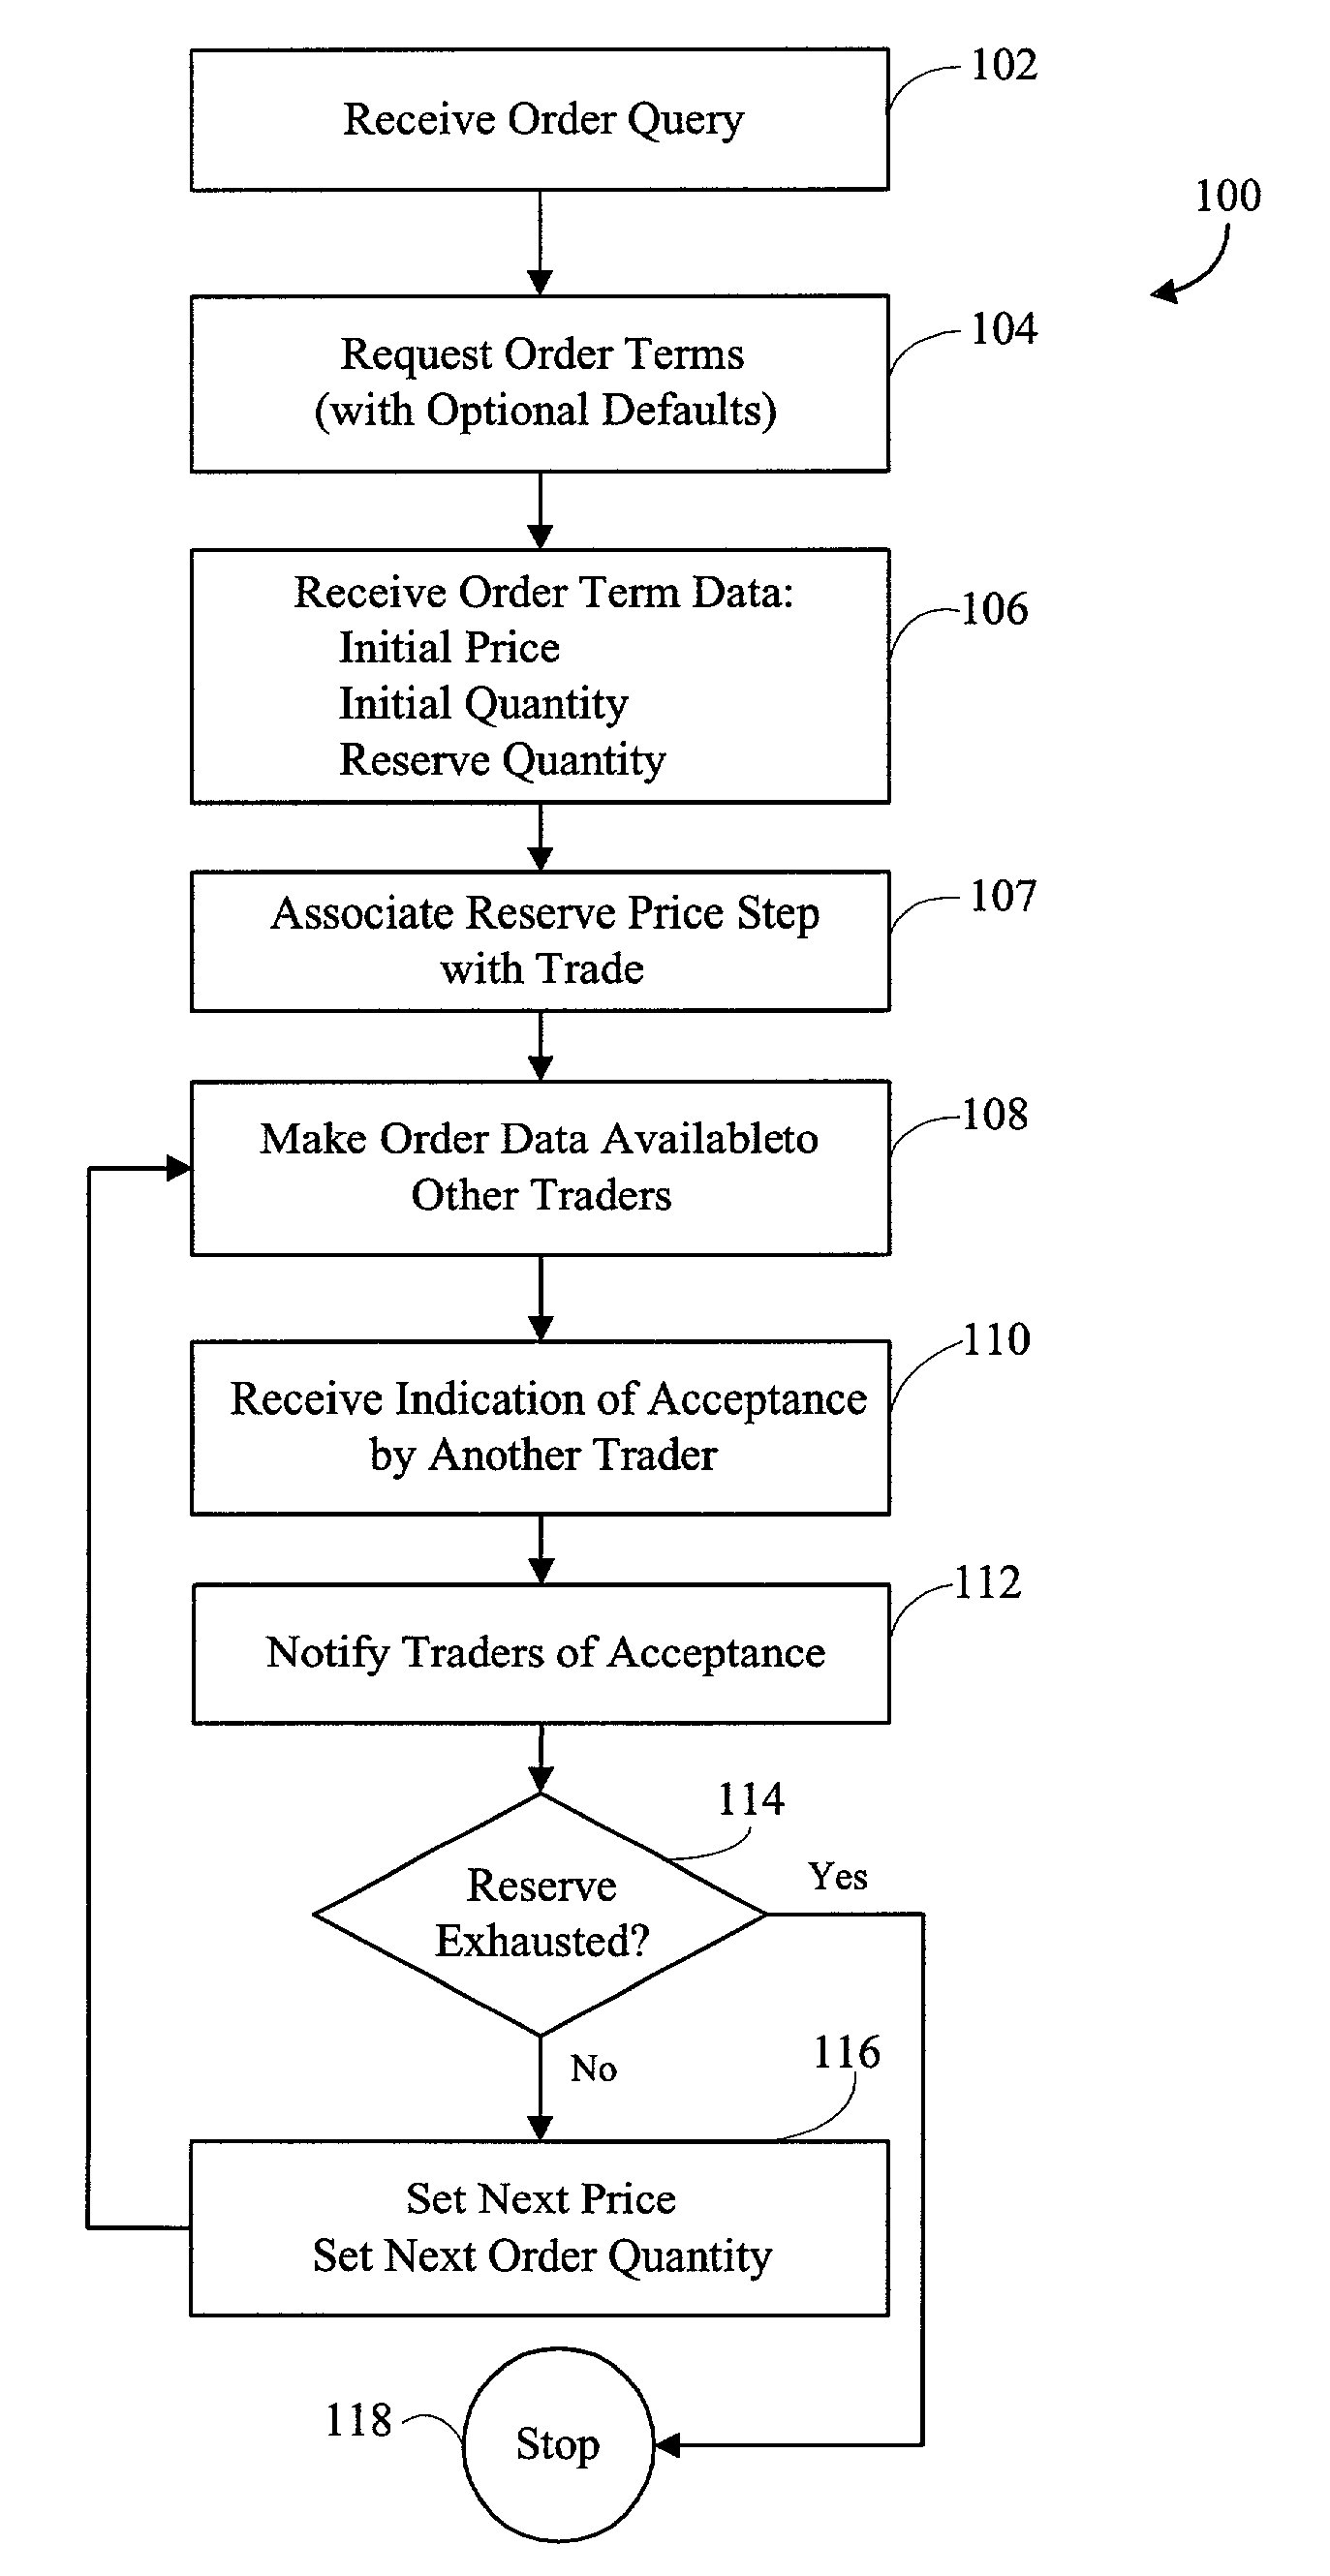 Price change of orders from reserve in an electronic trading system